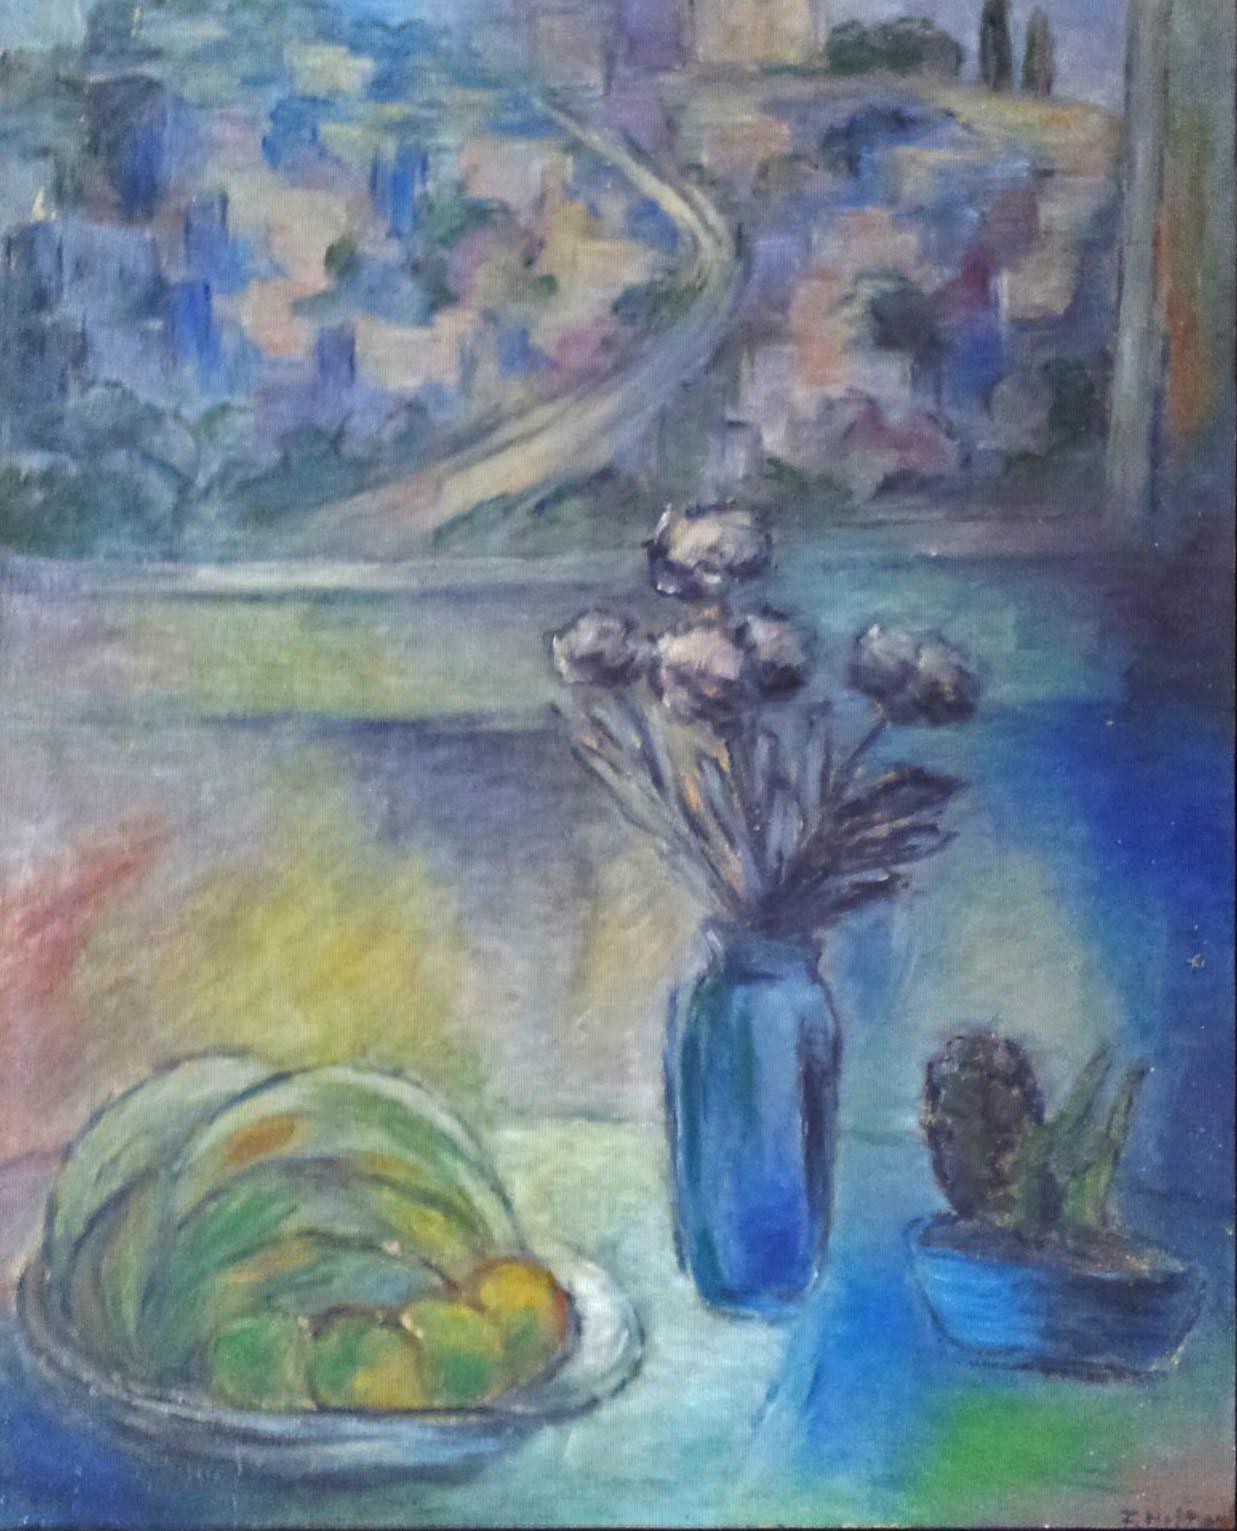 Fanny Hefter Still-Life Painting - Flowers and Still Life by the Window - Russian Art Jewish Judaica